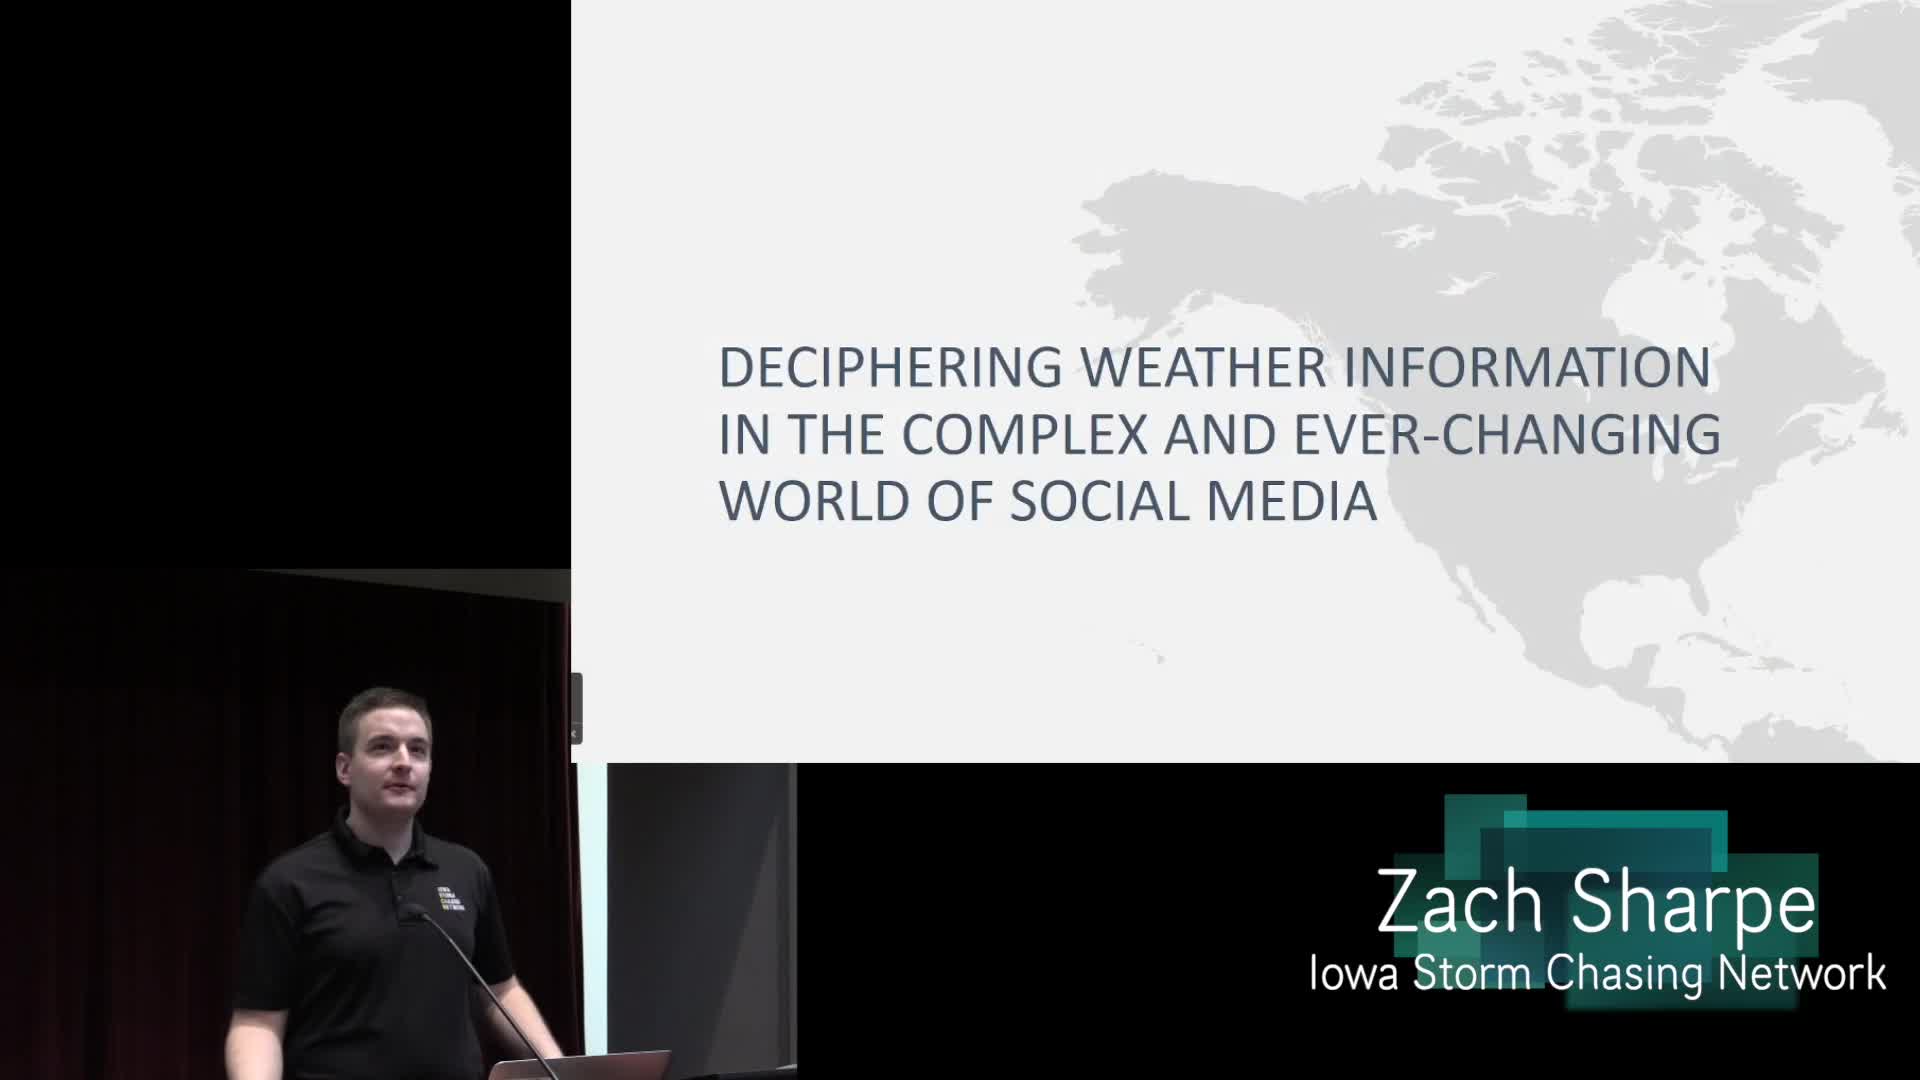 Deciphering Weather Information in the complex and ever-changing world of Social Media